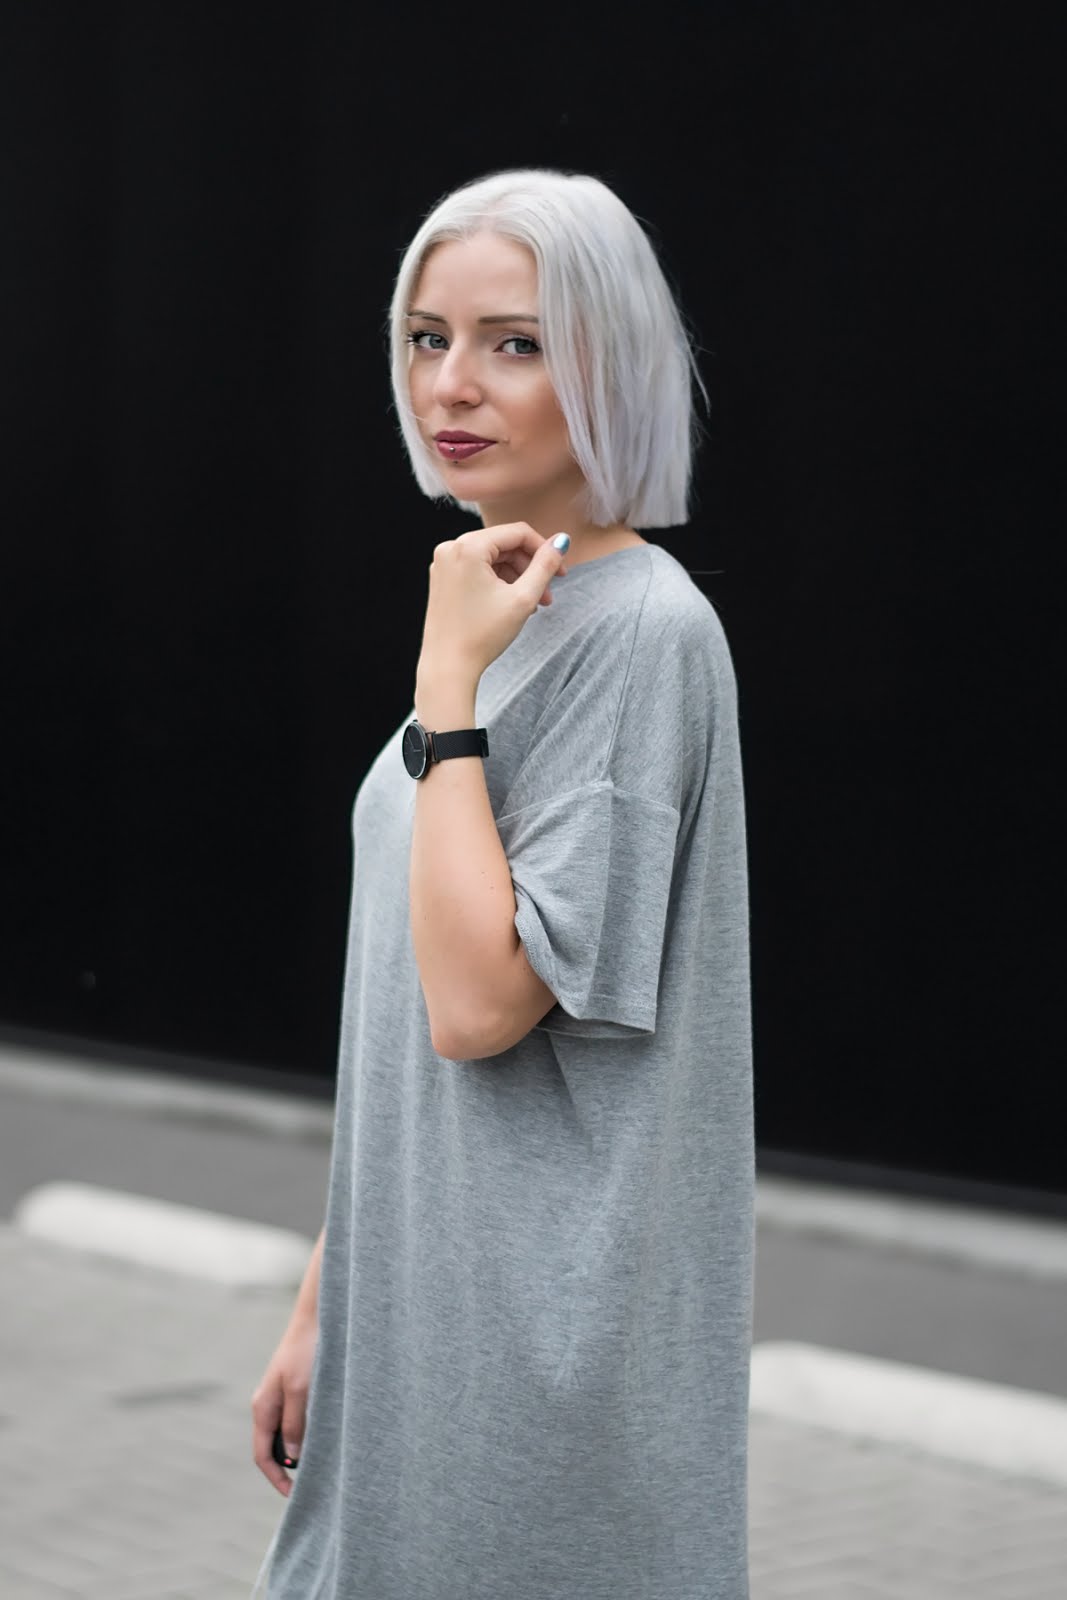 Weekday bryn t-shirt dress, oversized, flattered flats, minimalist, outfit, ss17, grey hair, cluse watch